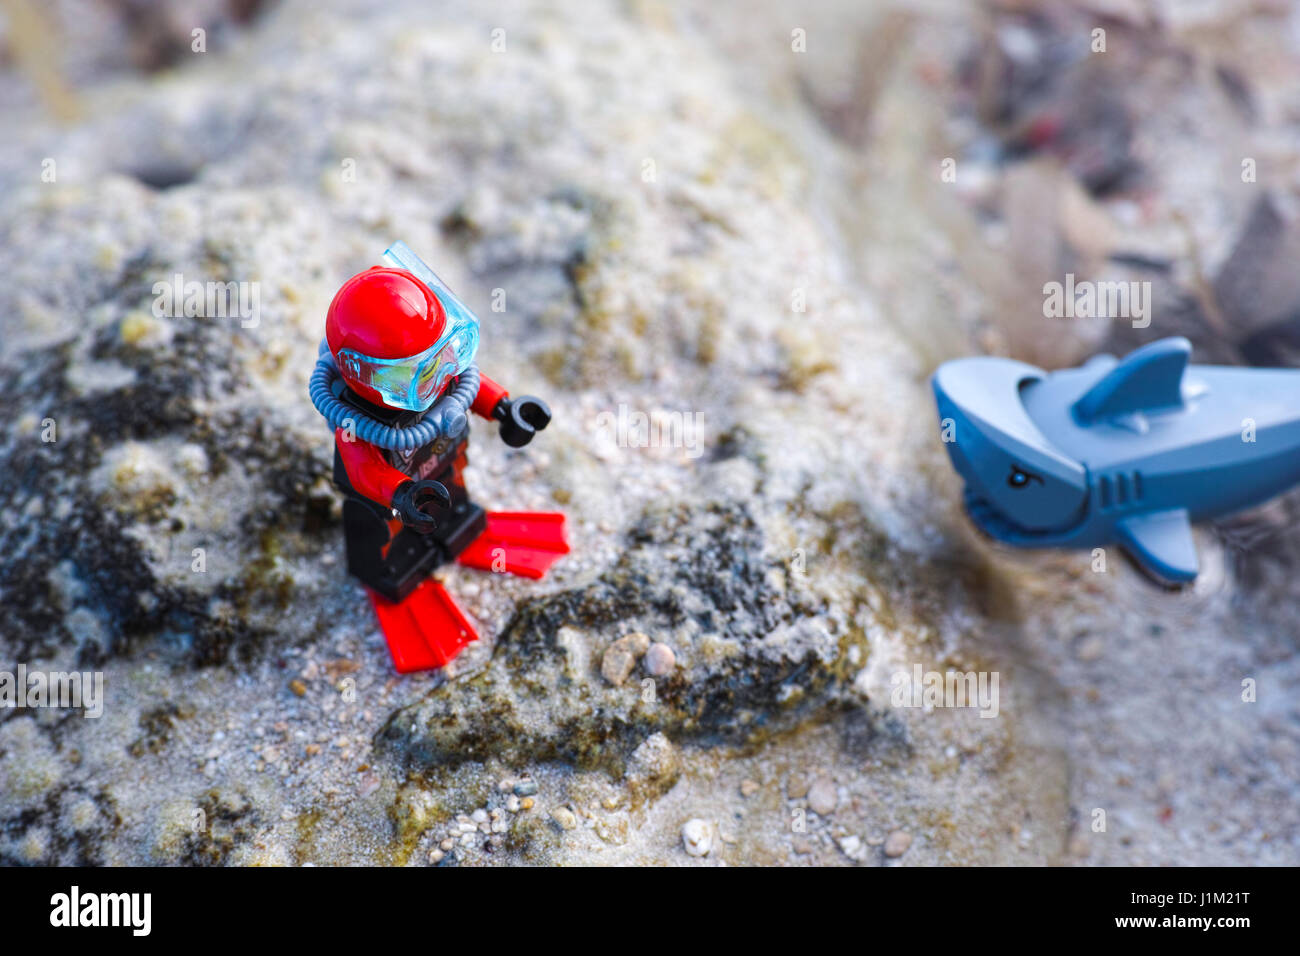 Paphos, Cyprus - October 09, 2016 Lego scuba diver and shark on seafloor. Shallow depth of field. Stock Photo